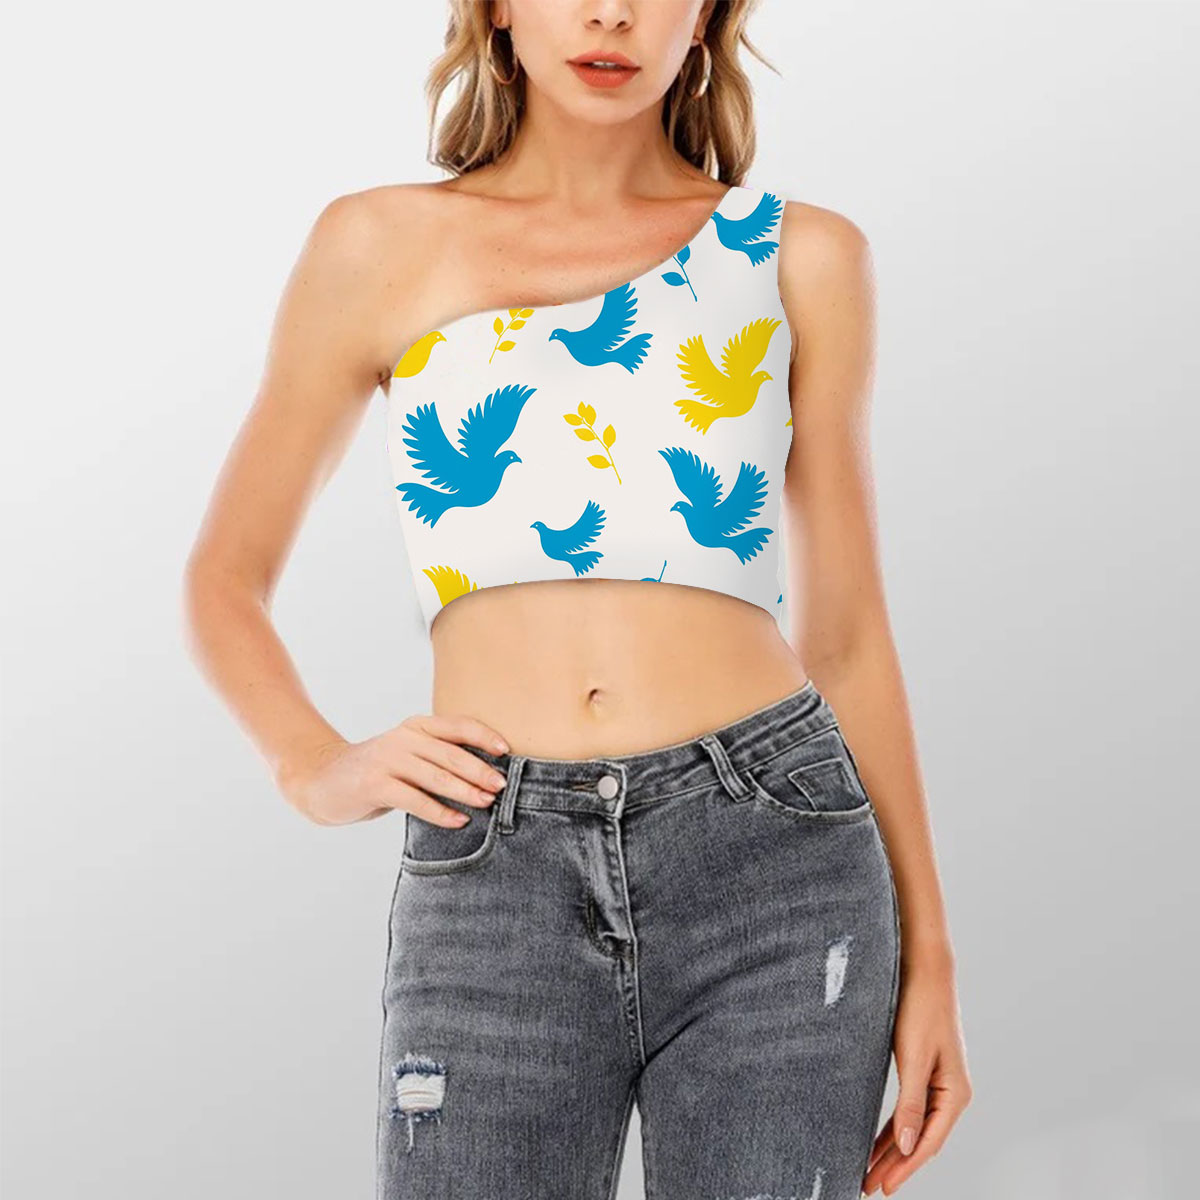 Peace Blue Yellow Dove Flyings Shoulder Cropped Top 6